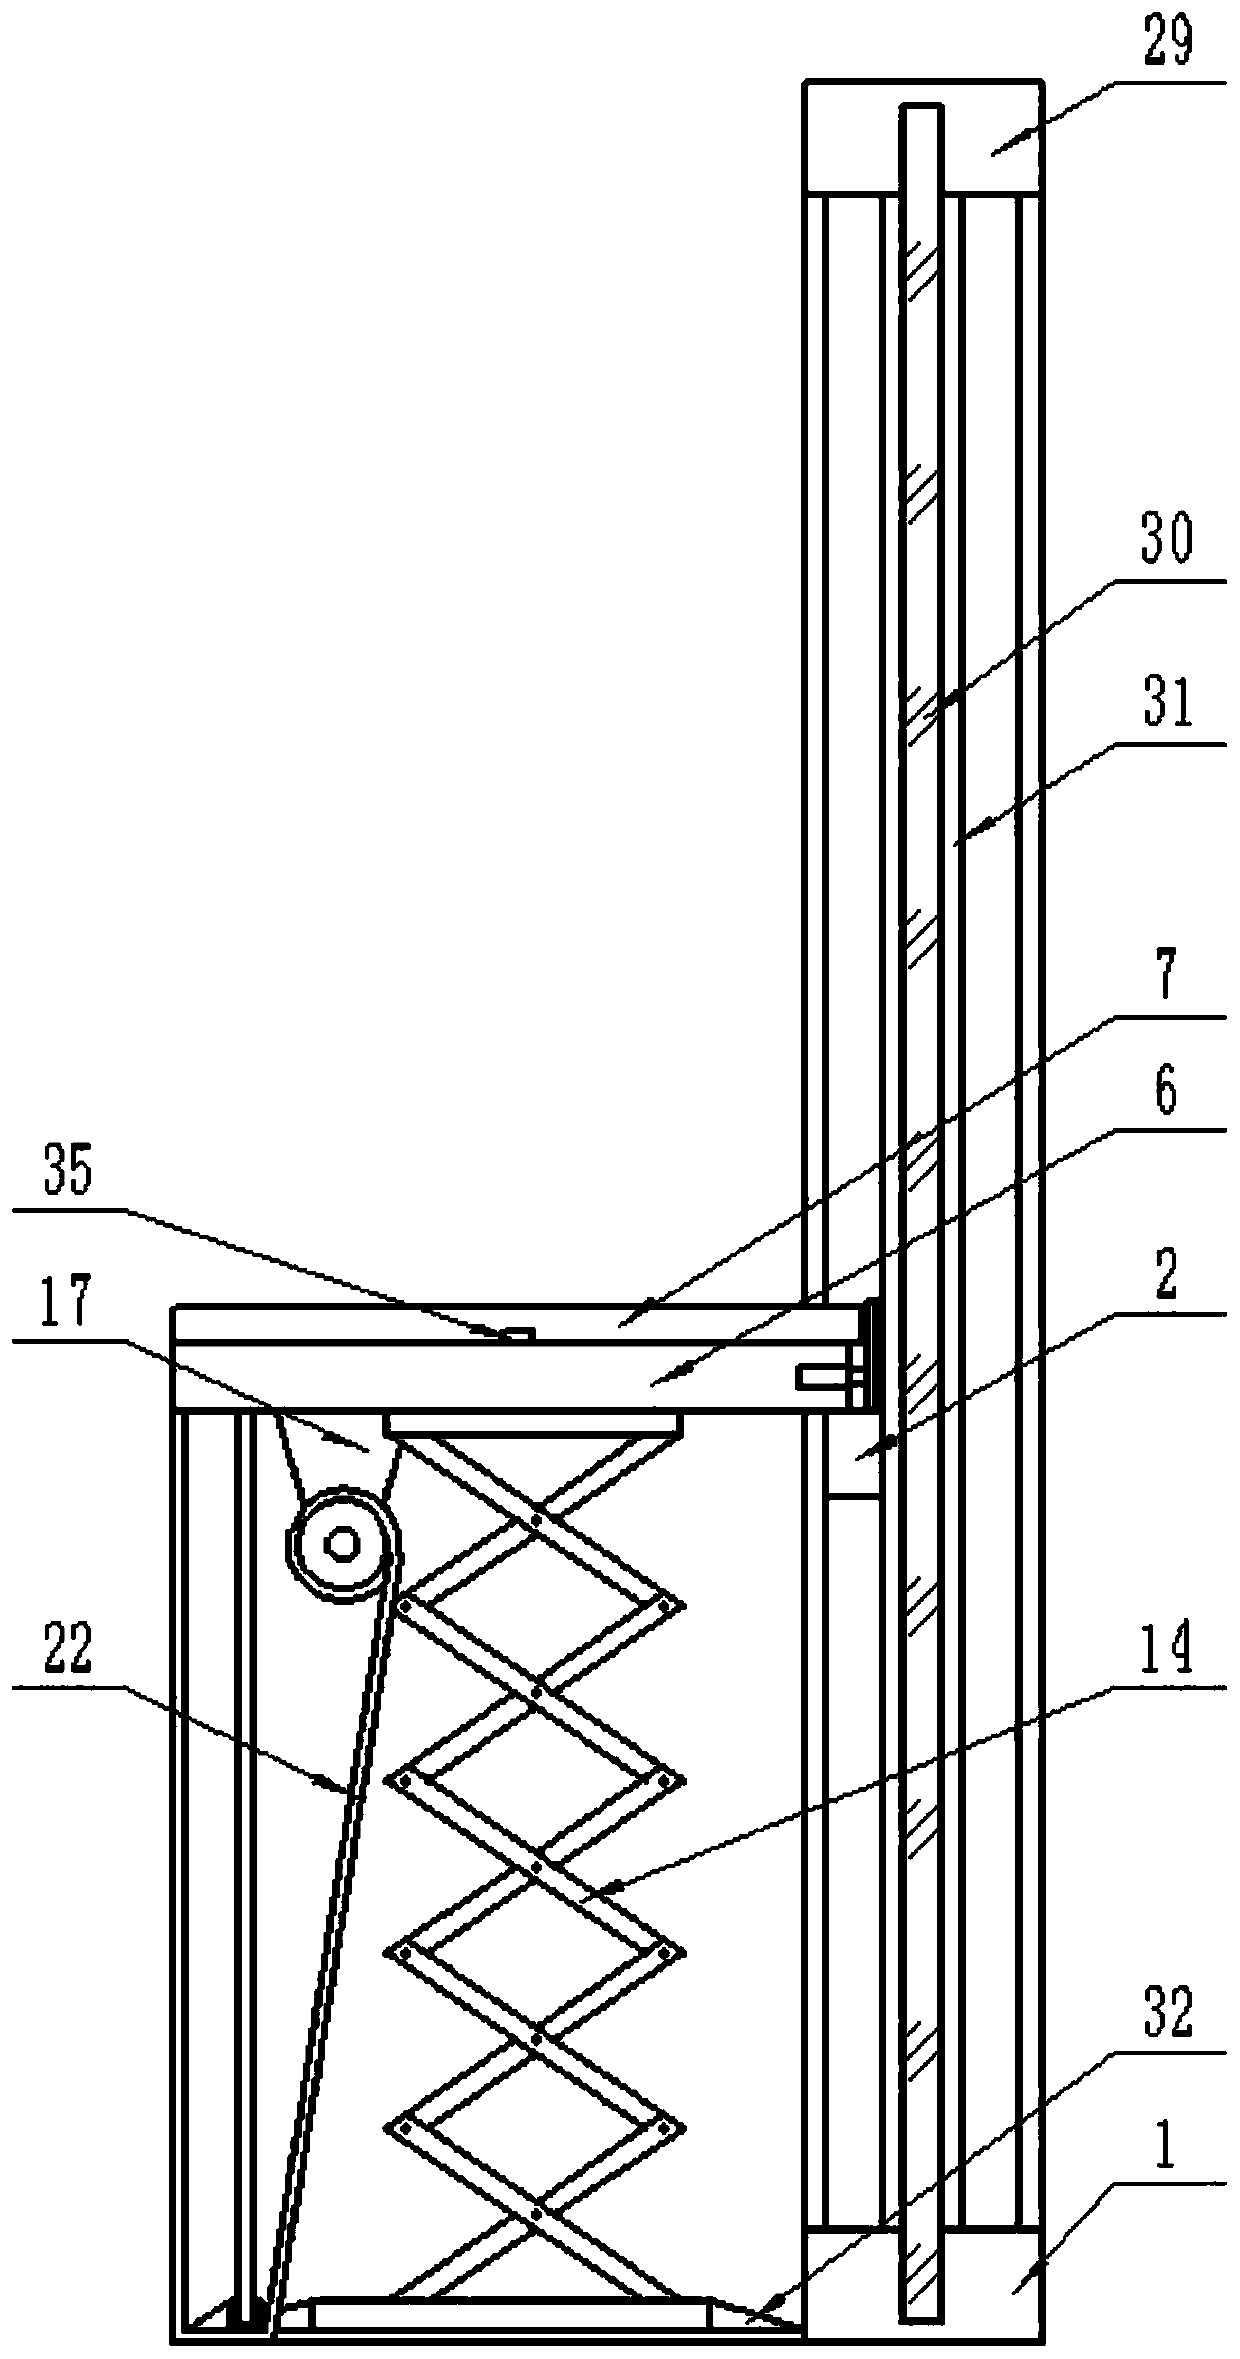 Automated window device capable of being retracted and extended